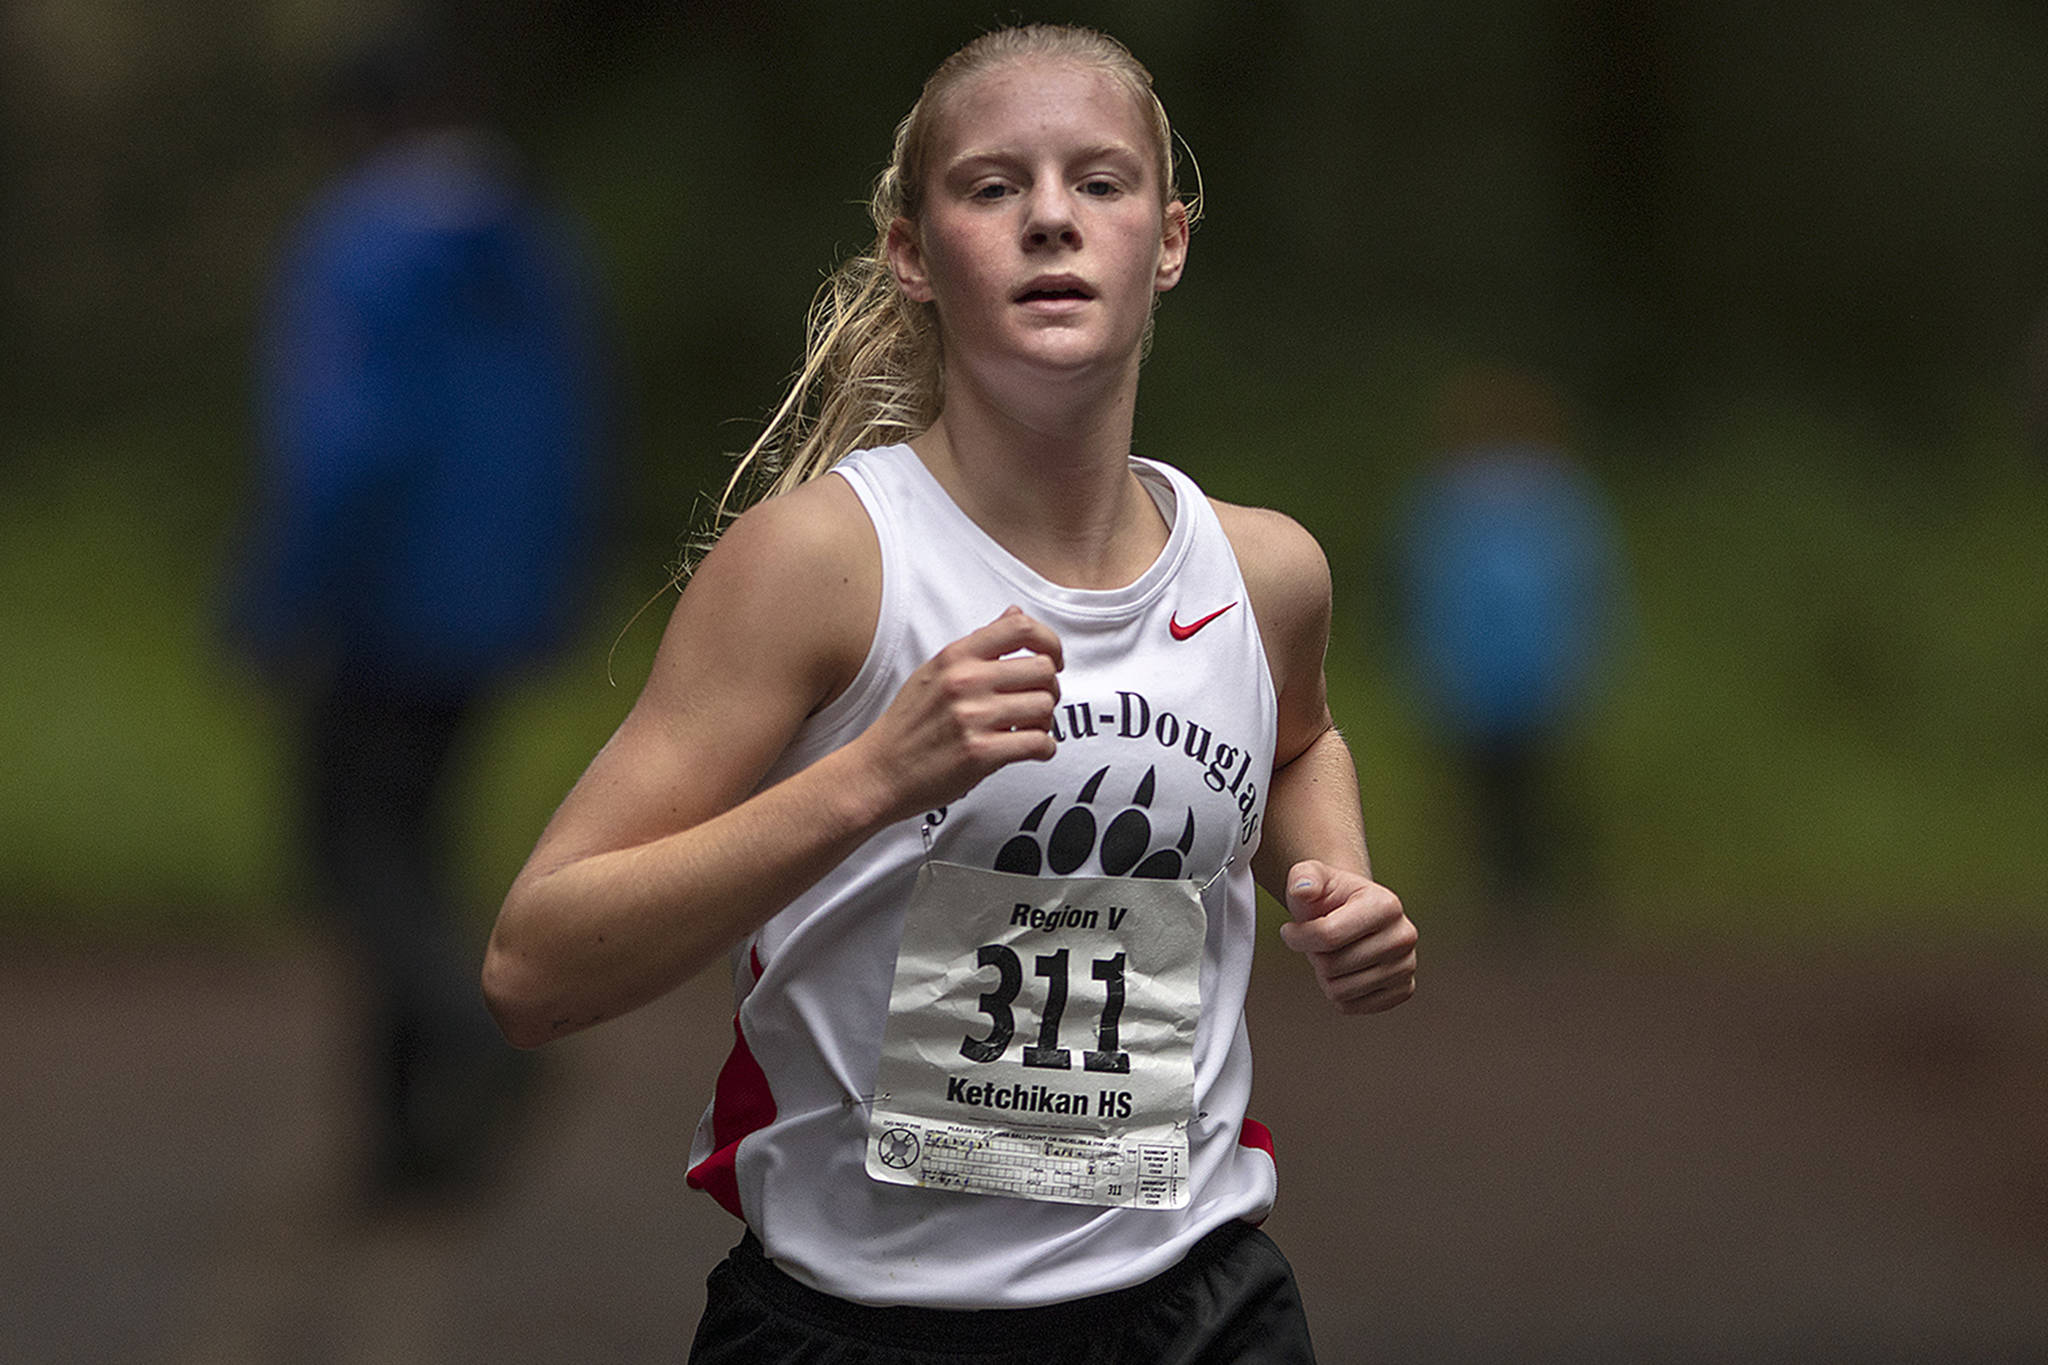 A team player: Juneau star runner grows into leadership role